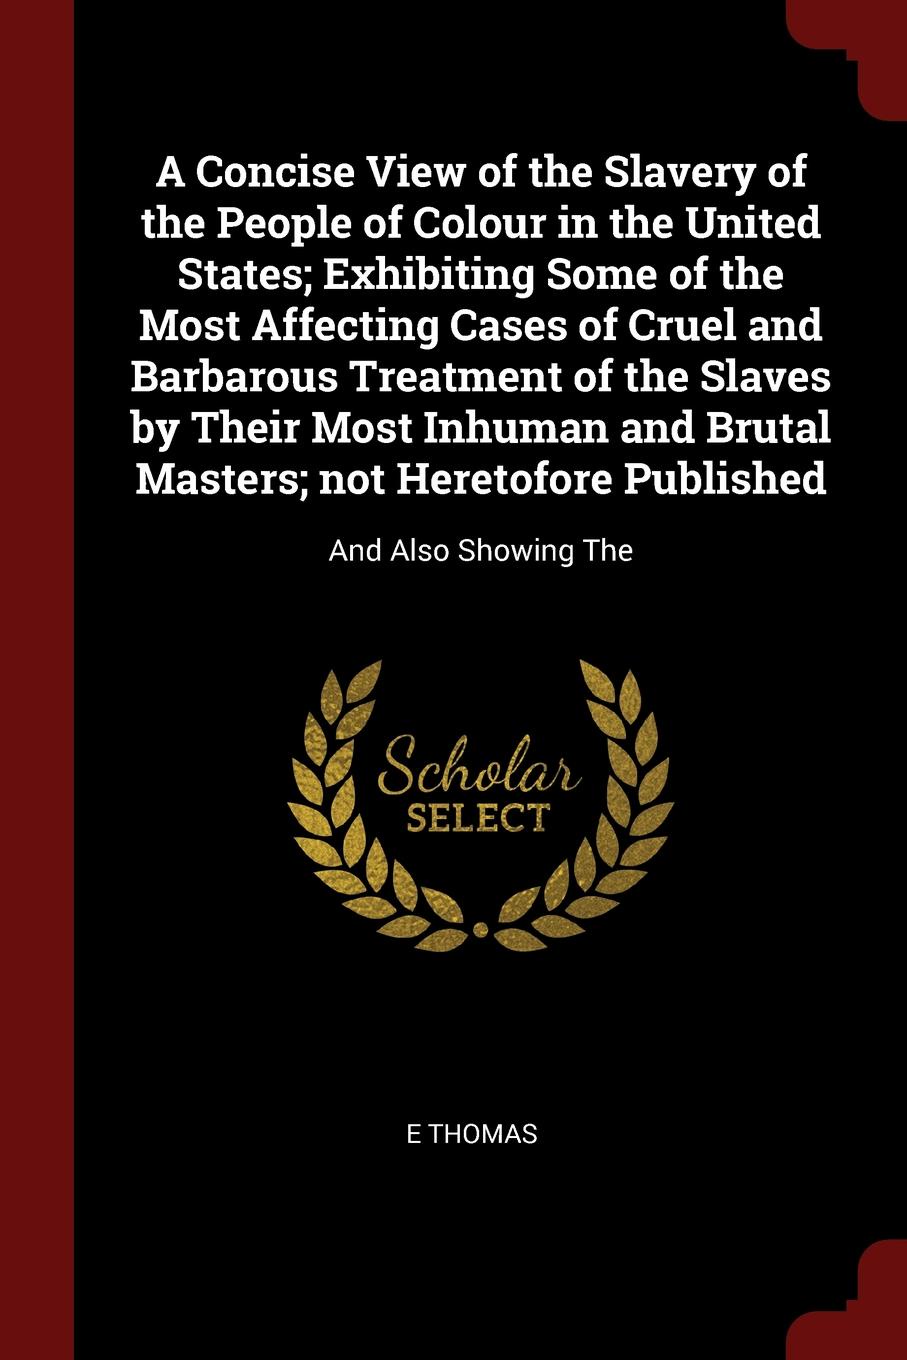 A Concise View of the Slavery of the People of Colour in the United States; Exhibiting Some of the Most Affecting Cases of Cruel and Barbarous Treatment of the Slaves by Their Most Inhuman and Brutal Masters; not Heretofore Published. And Also Sho...